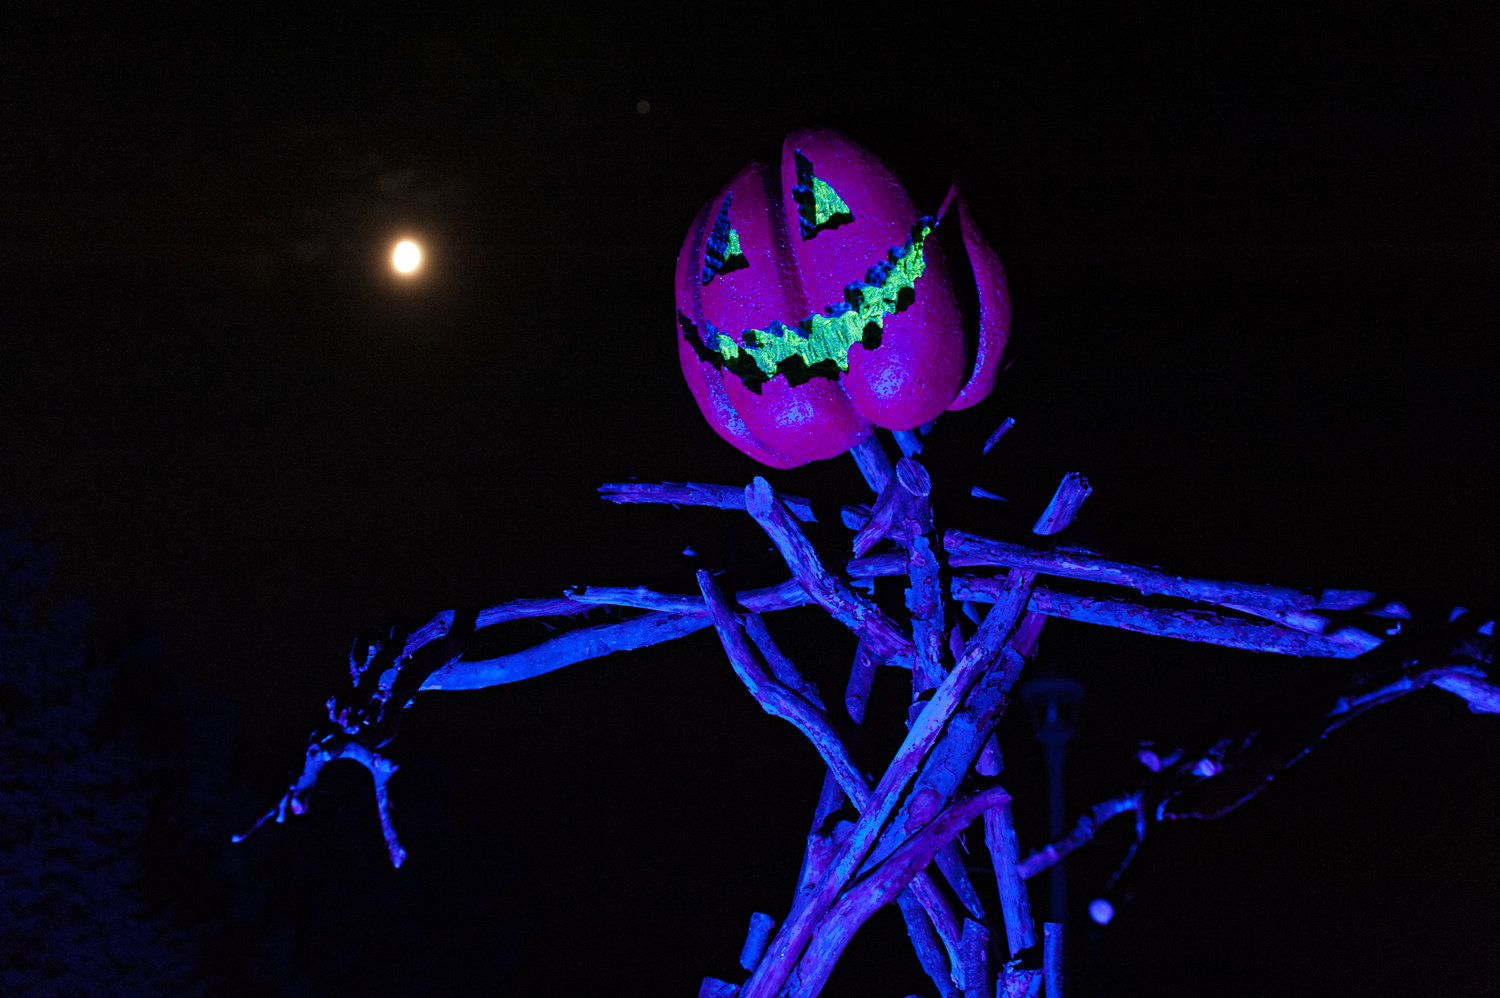 Enjoy a spooky and groovy good time at Peace, Love & Pumpkins with the Pumpkin King.